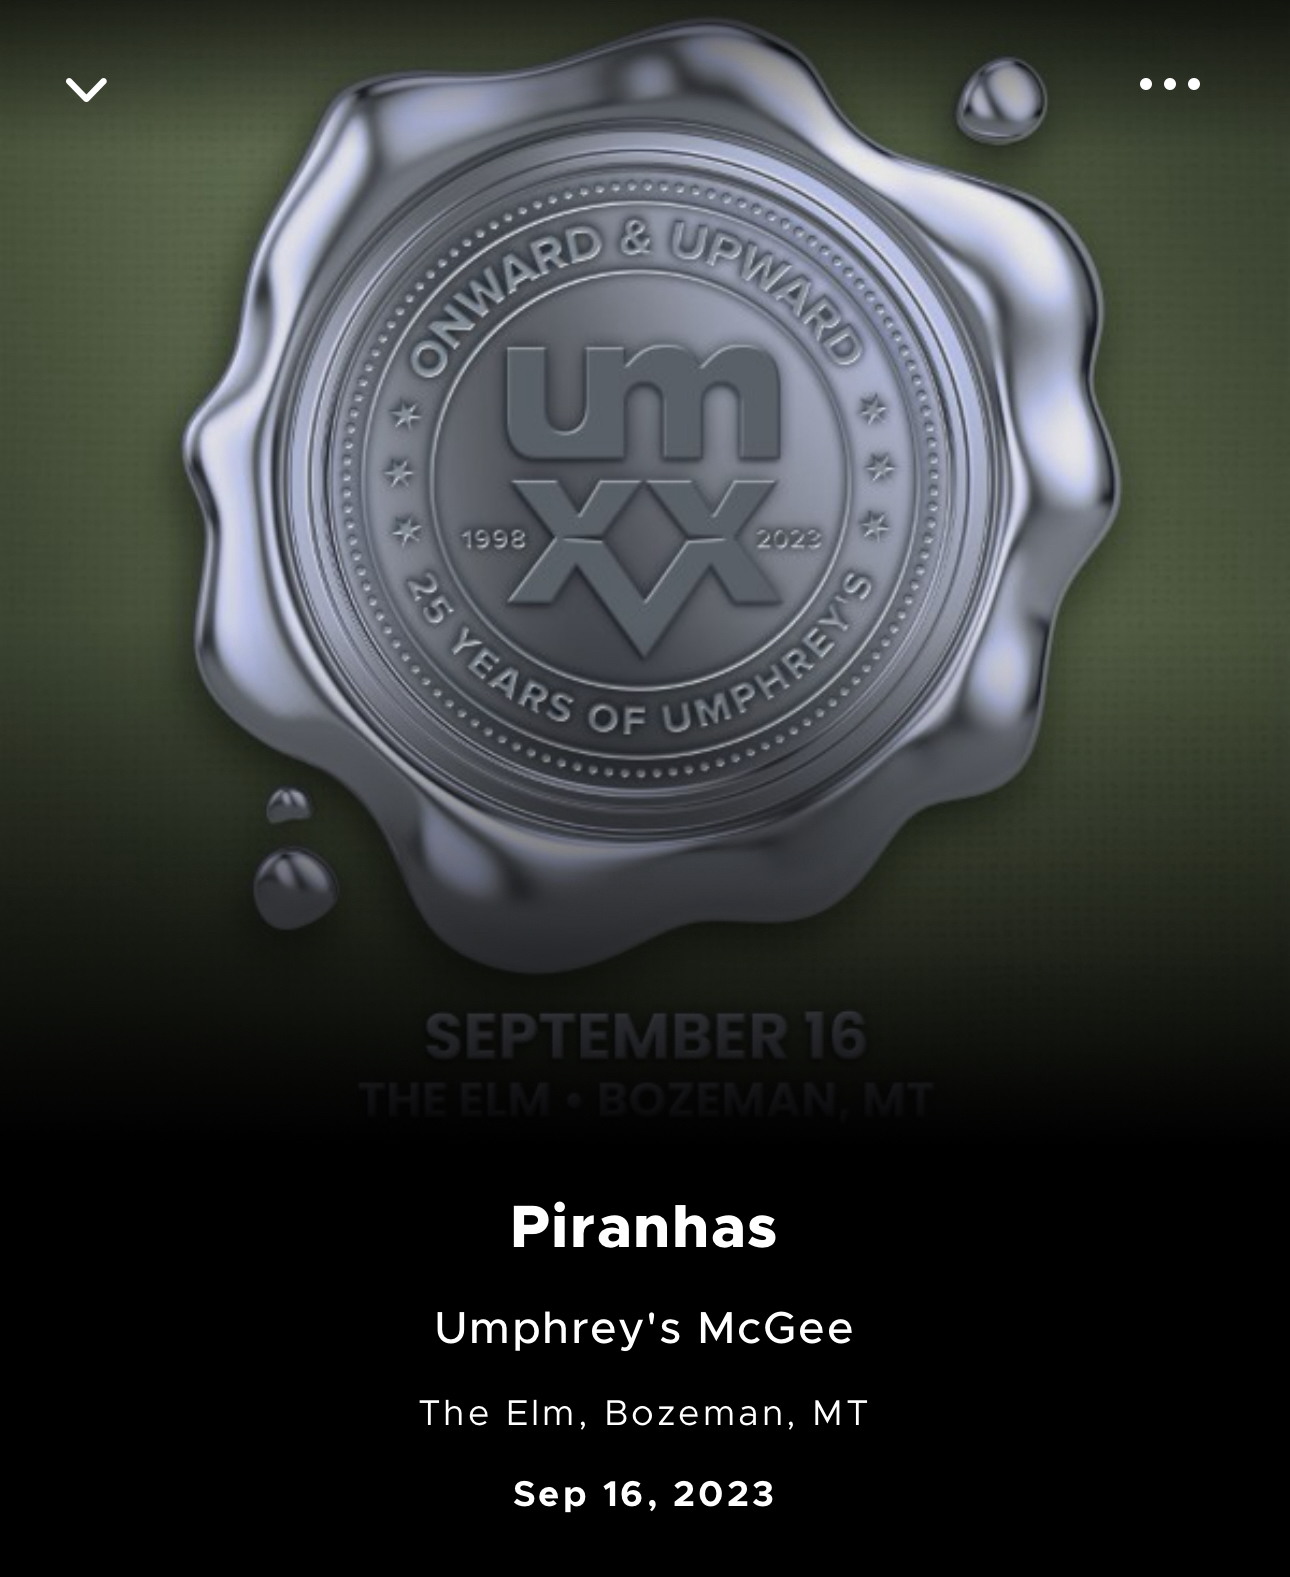 The image features an emblem with the text “ONWARD & UPWARD - 25 YEARS OF UMPHREY’S” and the dates “1998 - 2022” commemorating the 25th anniversary of the band Umphrey